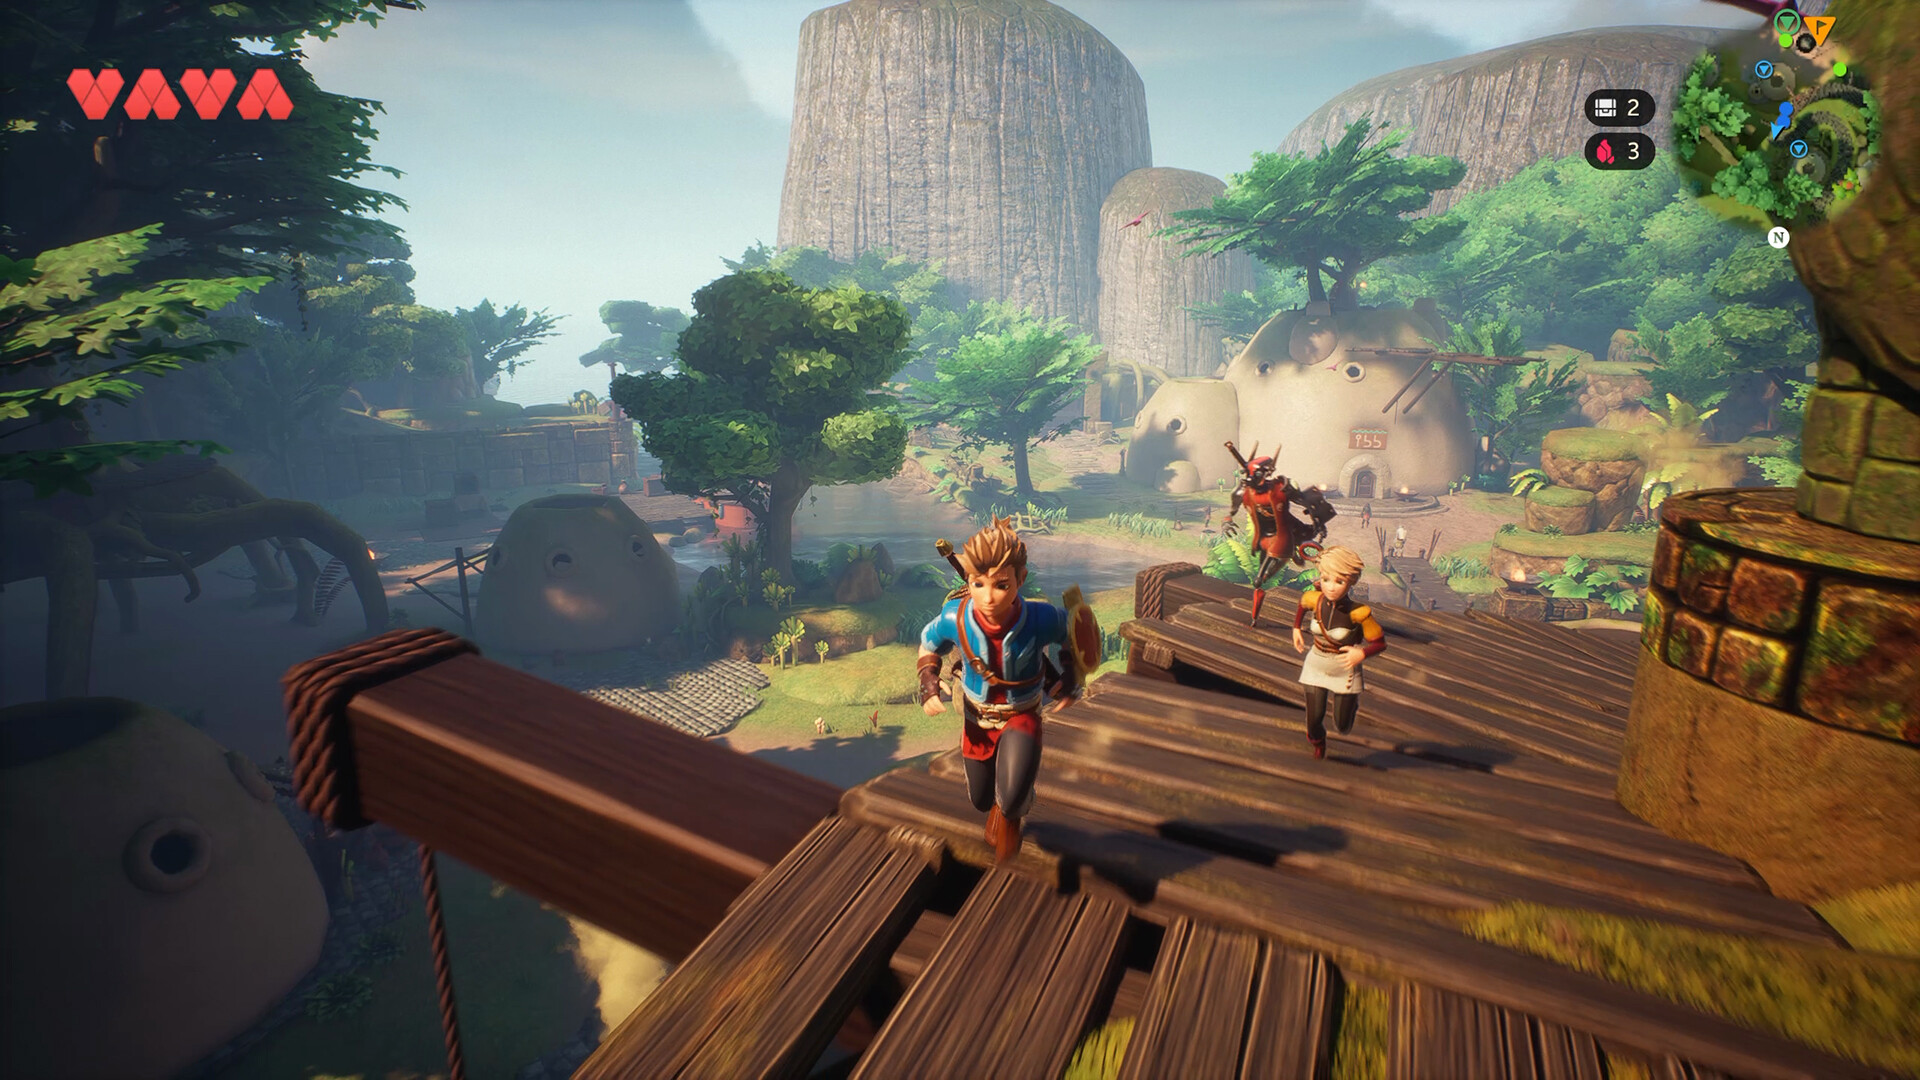 Find the best laptops for Oceanhorn 2: Knights of the Lost Realm